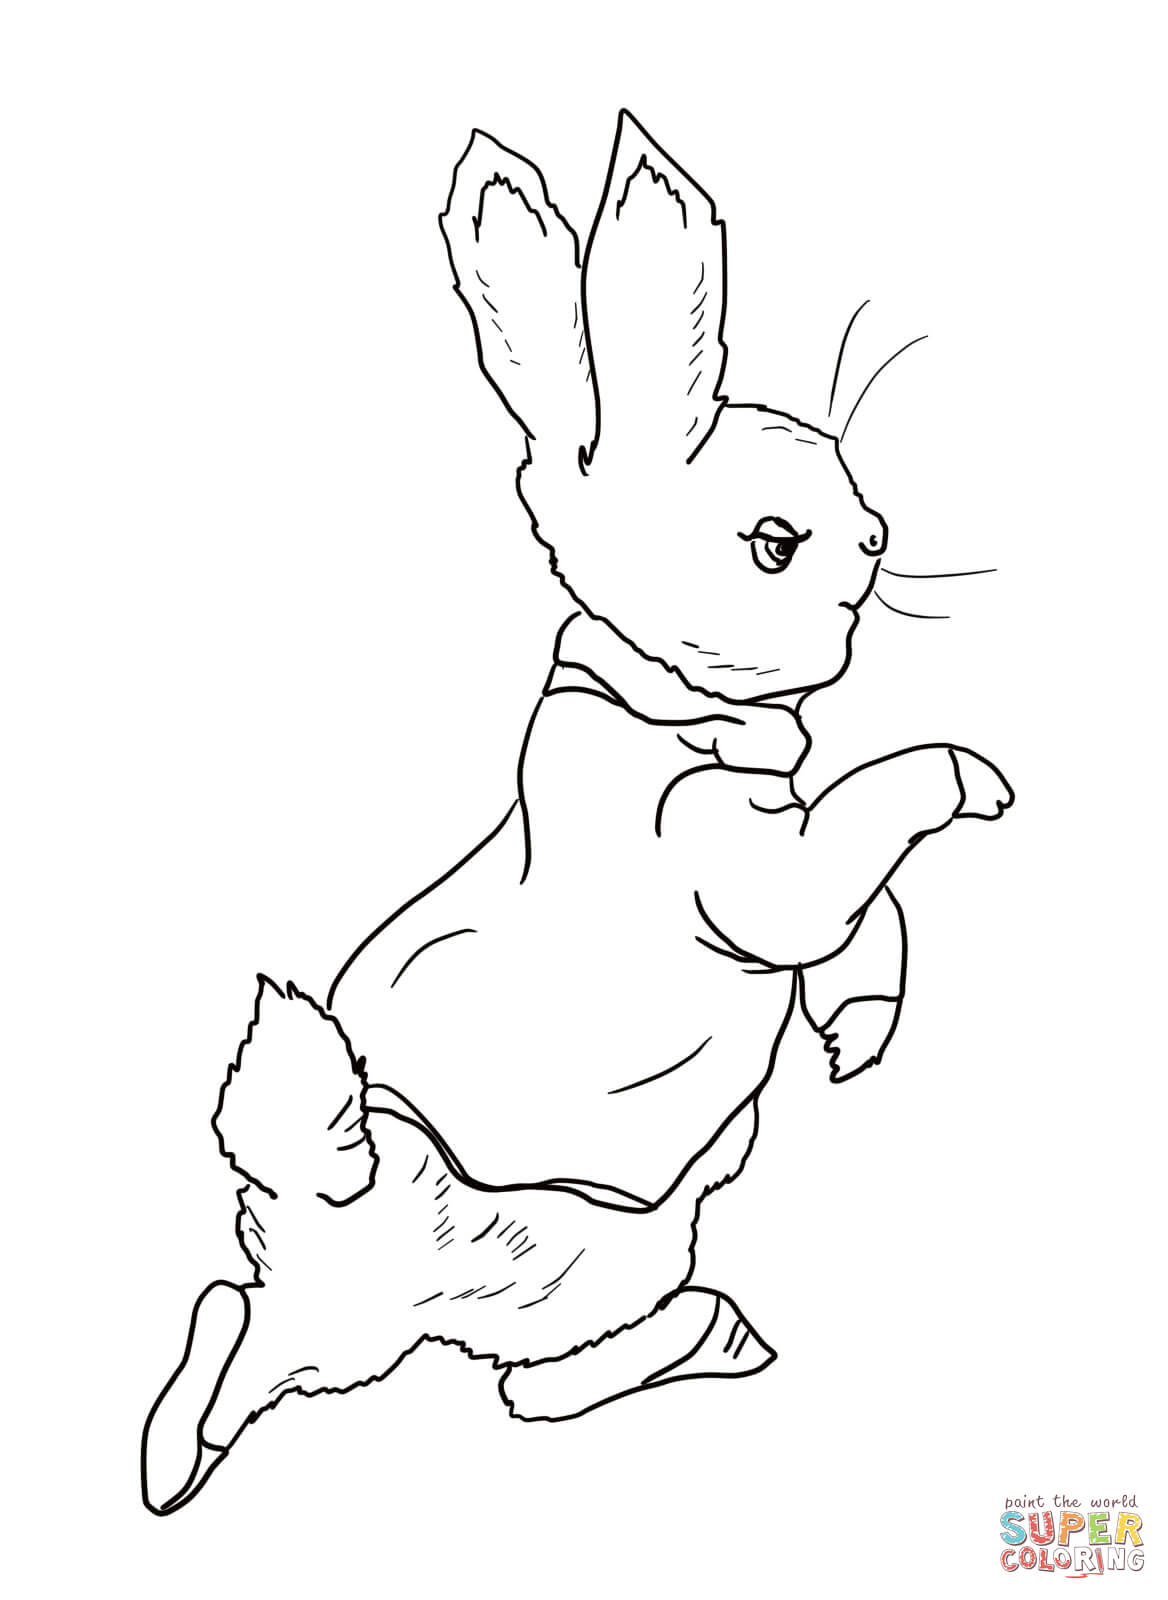 Peter rabbit is going into the garden coloring page free printable coloring pages